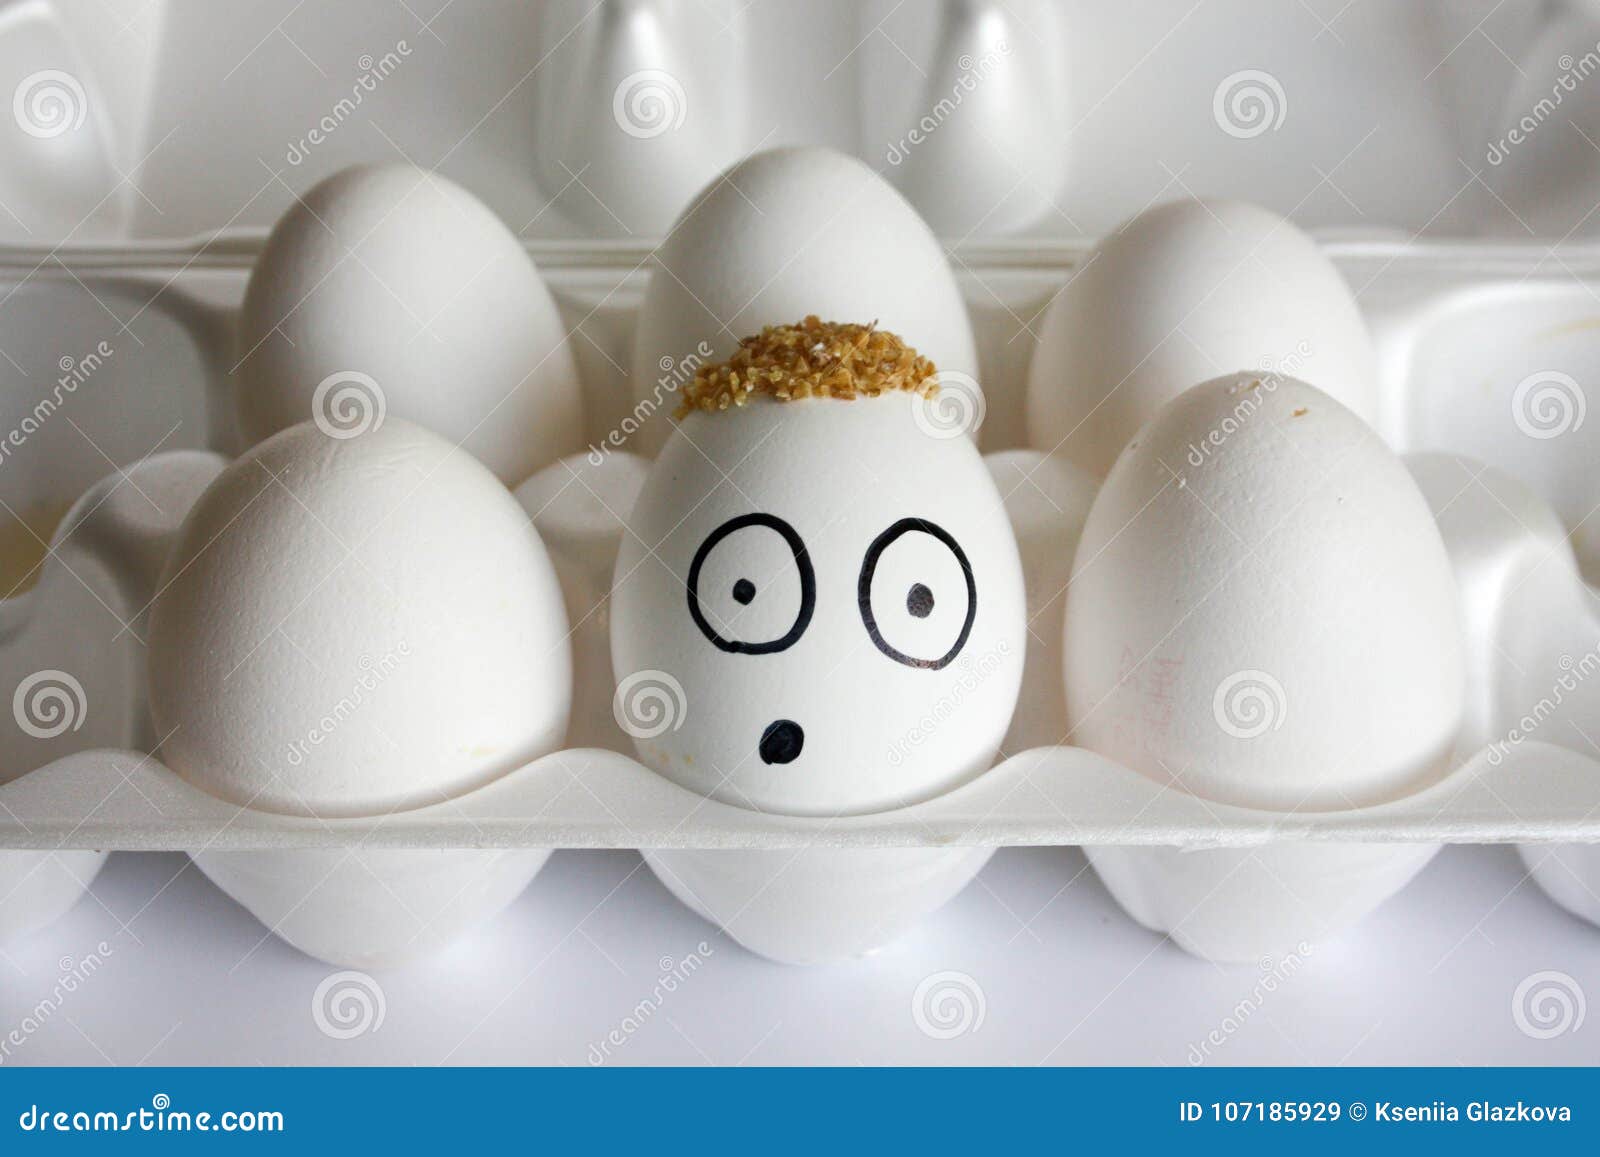 Hair Concept. the Eggs are Funny and Stock Image - Image of eggs, cheerful:  107185929